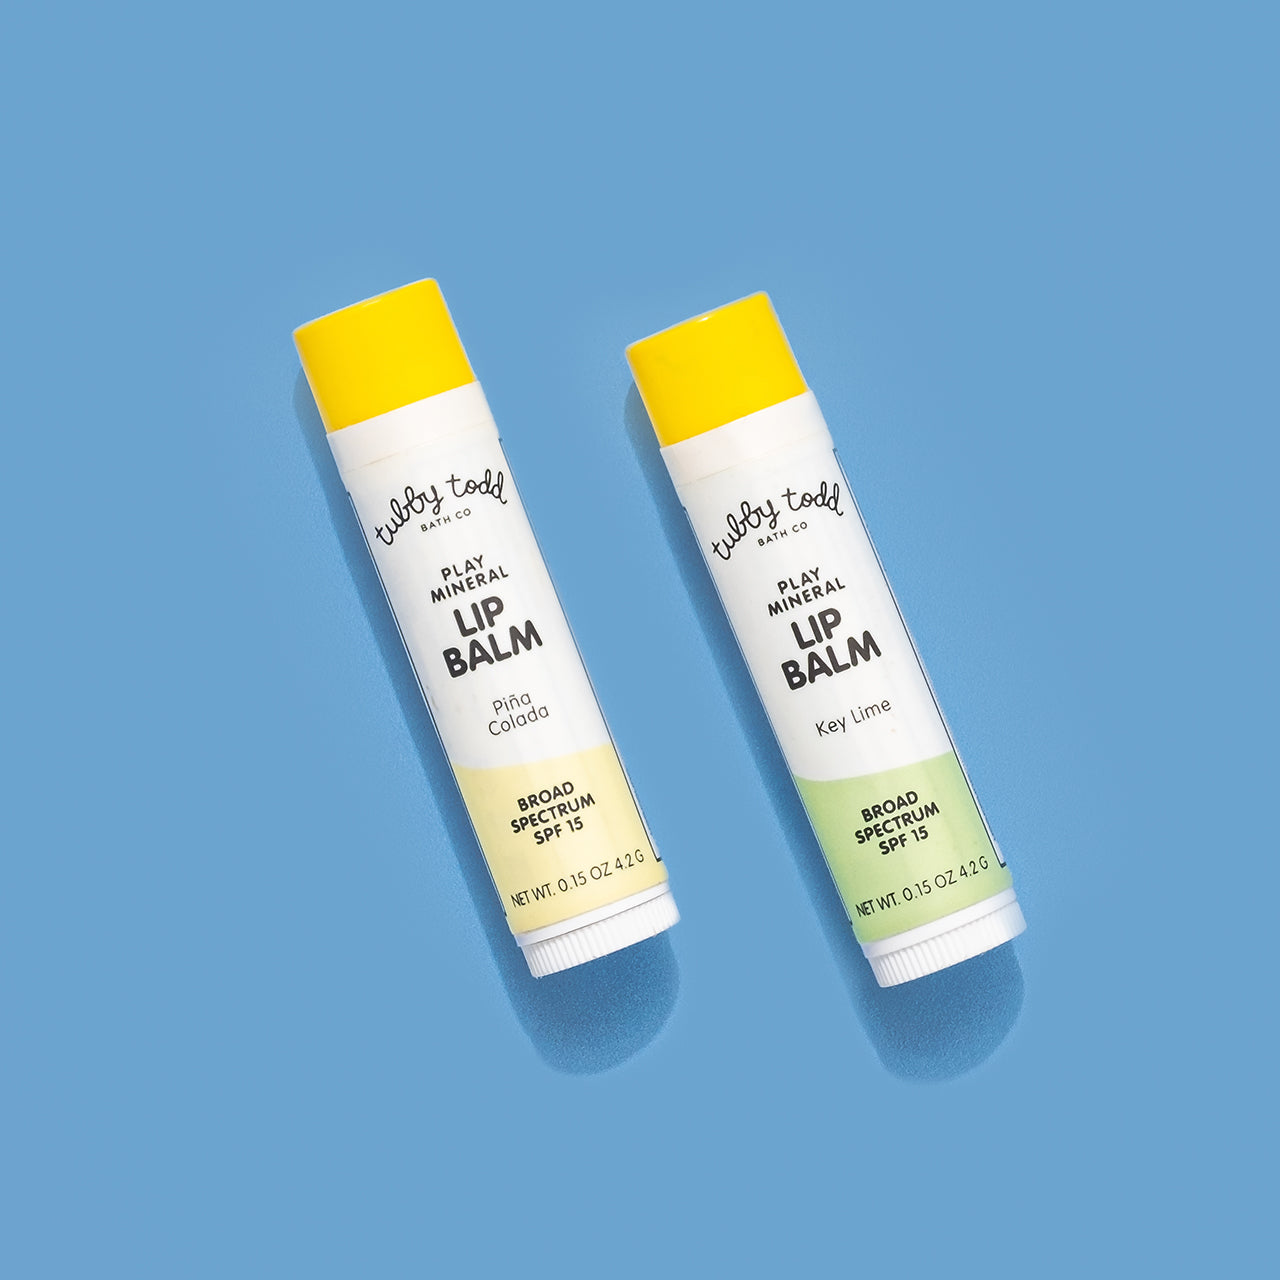 SPF Lip Balm 2-pack laying on the blue background.